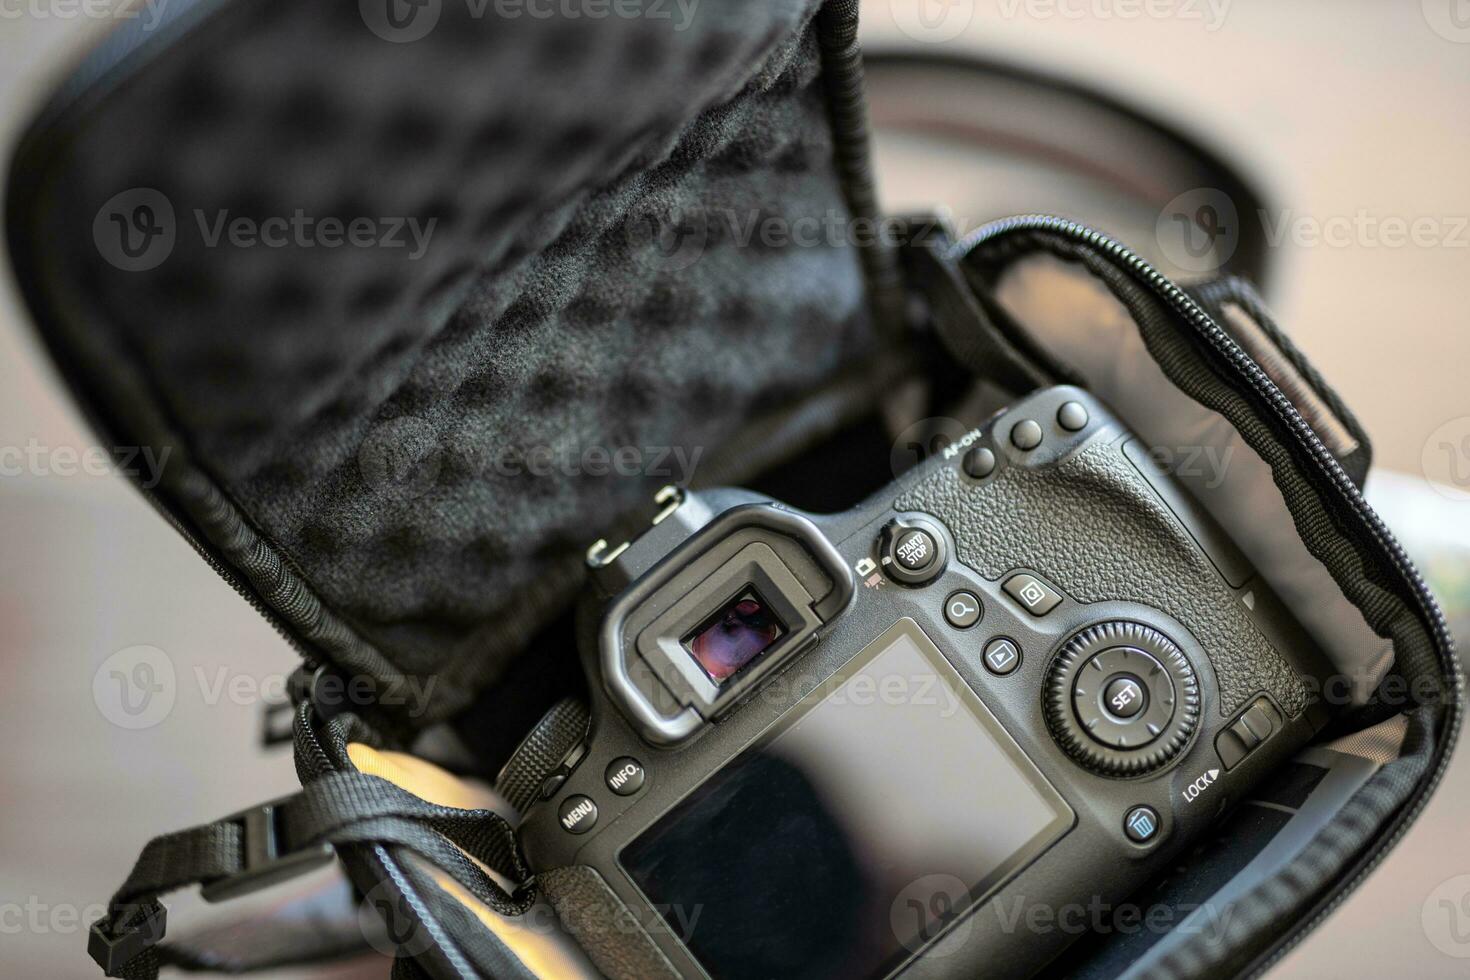 Black bag with dslr camera. Abstract photography background, photographer equipment in bag photo